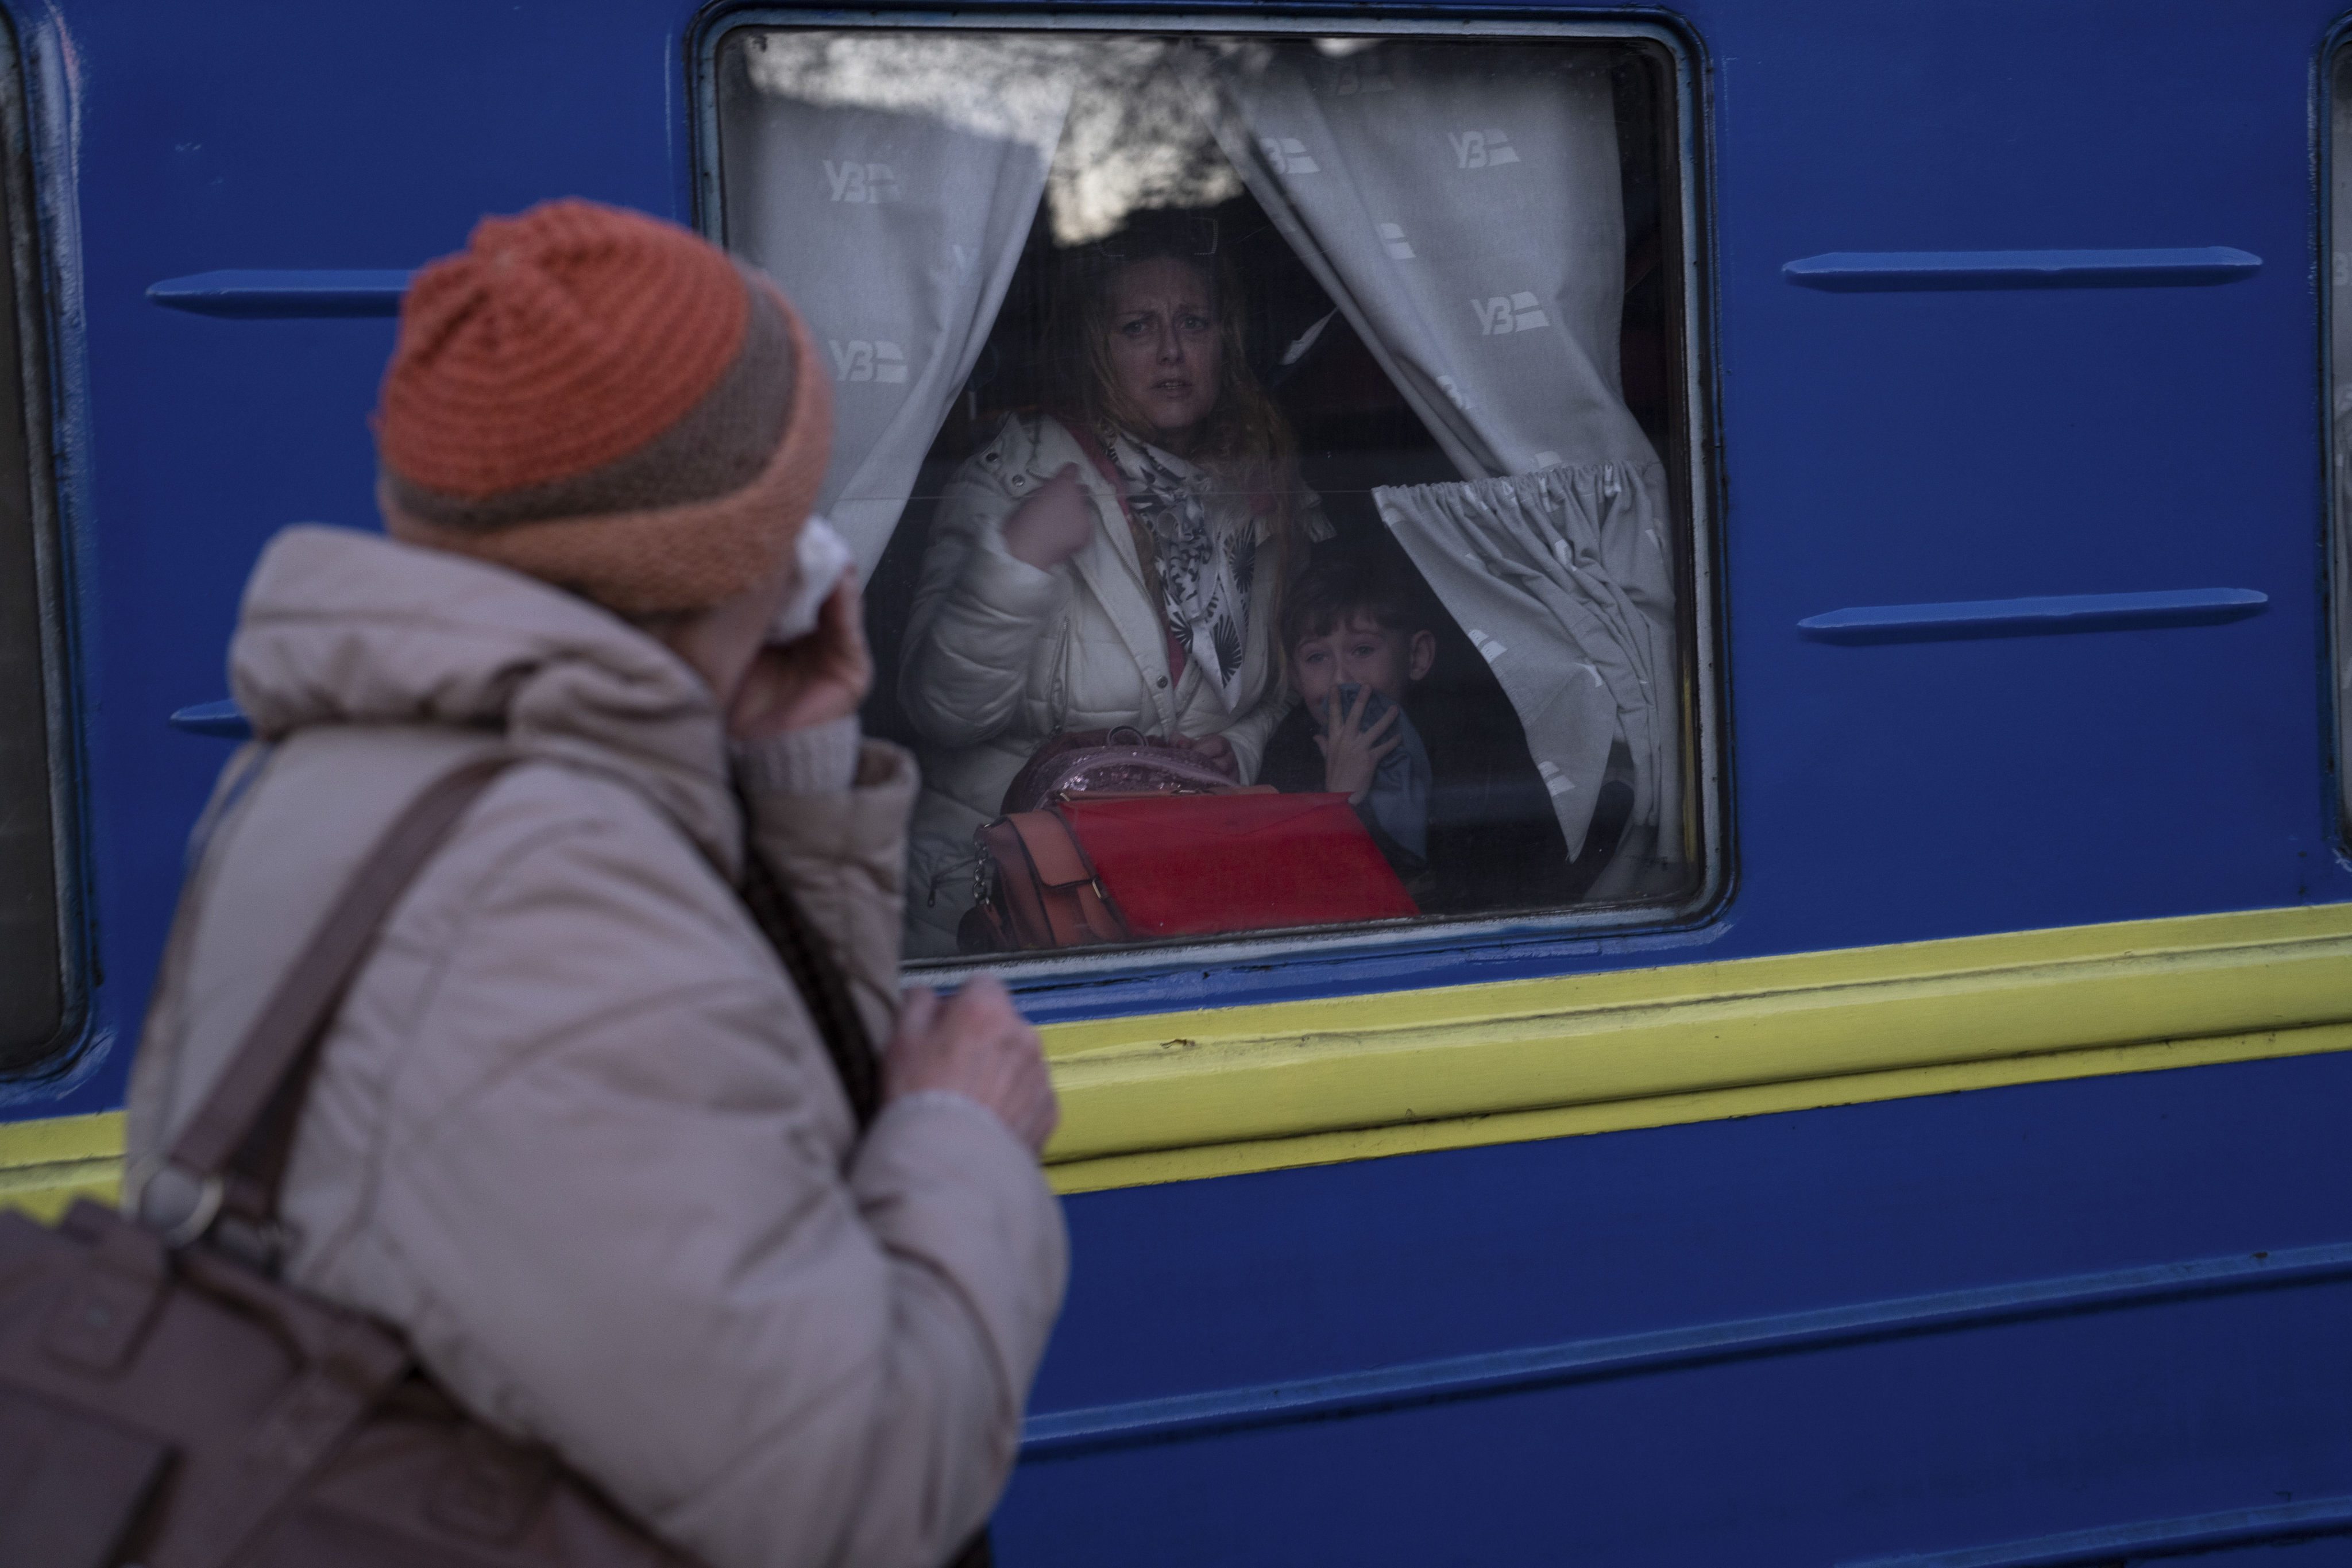 Ludmila (left) says goodbye to her granddaughter Kristina and great grandson Yaric as they leave the train station in Odesa, southern Ukraine, on March 22. The UN refugee agency says more than 3.5 million people have fled Ukraine since Russia began its invasion. Photo: AP